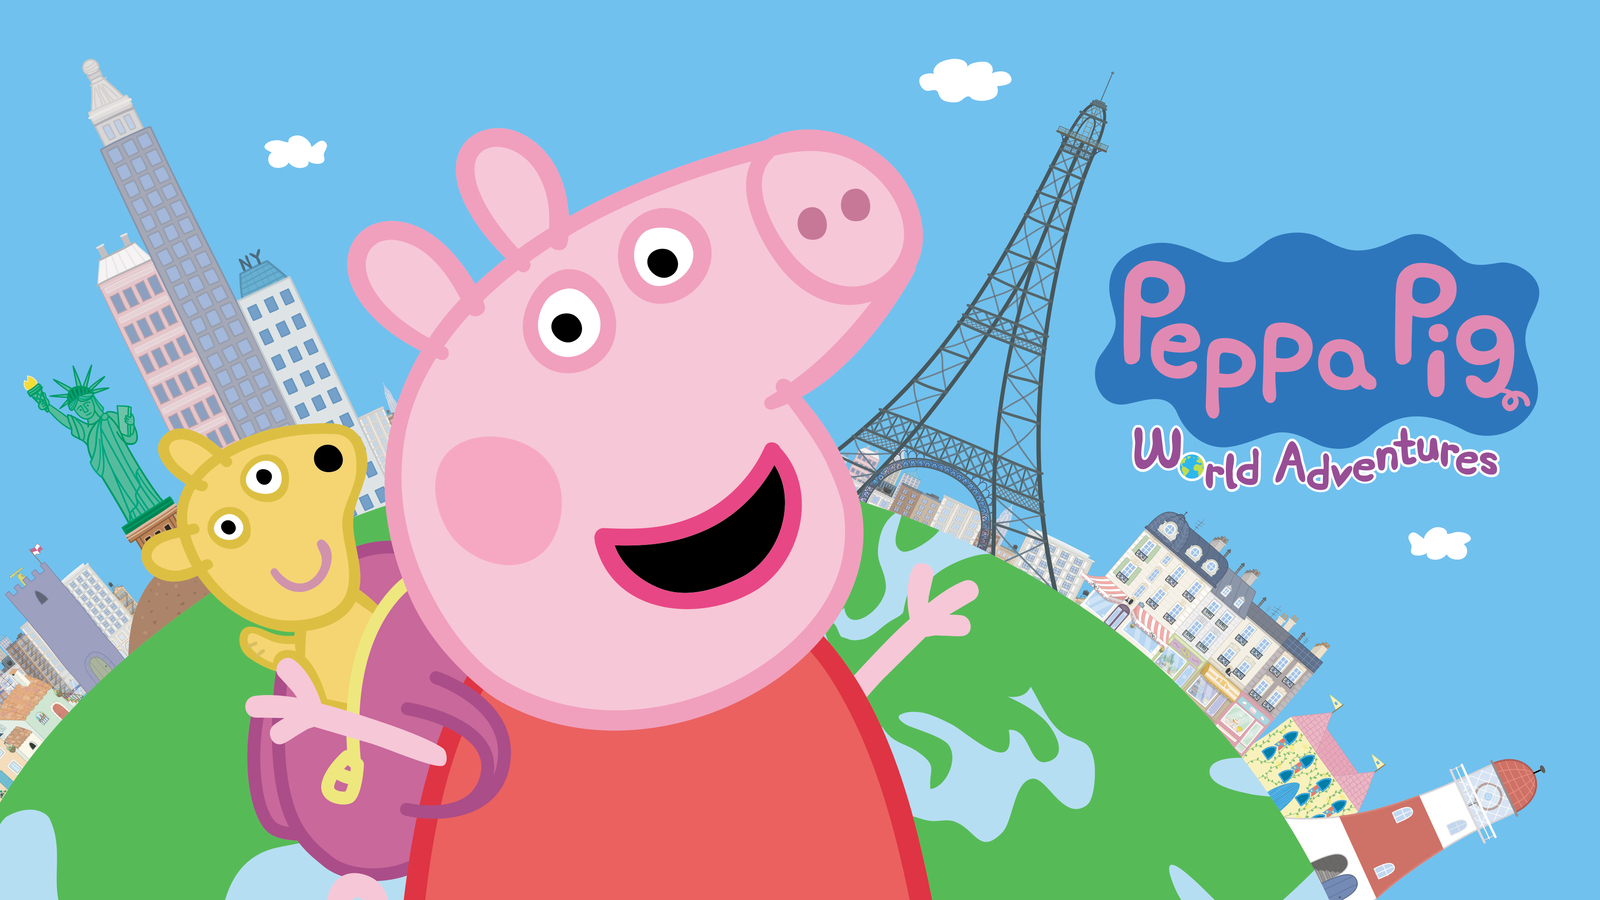 Peppa Pig will return for a world adventure in 2023